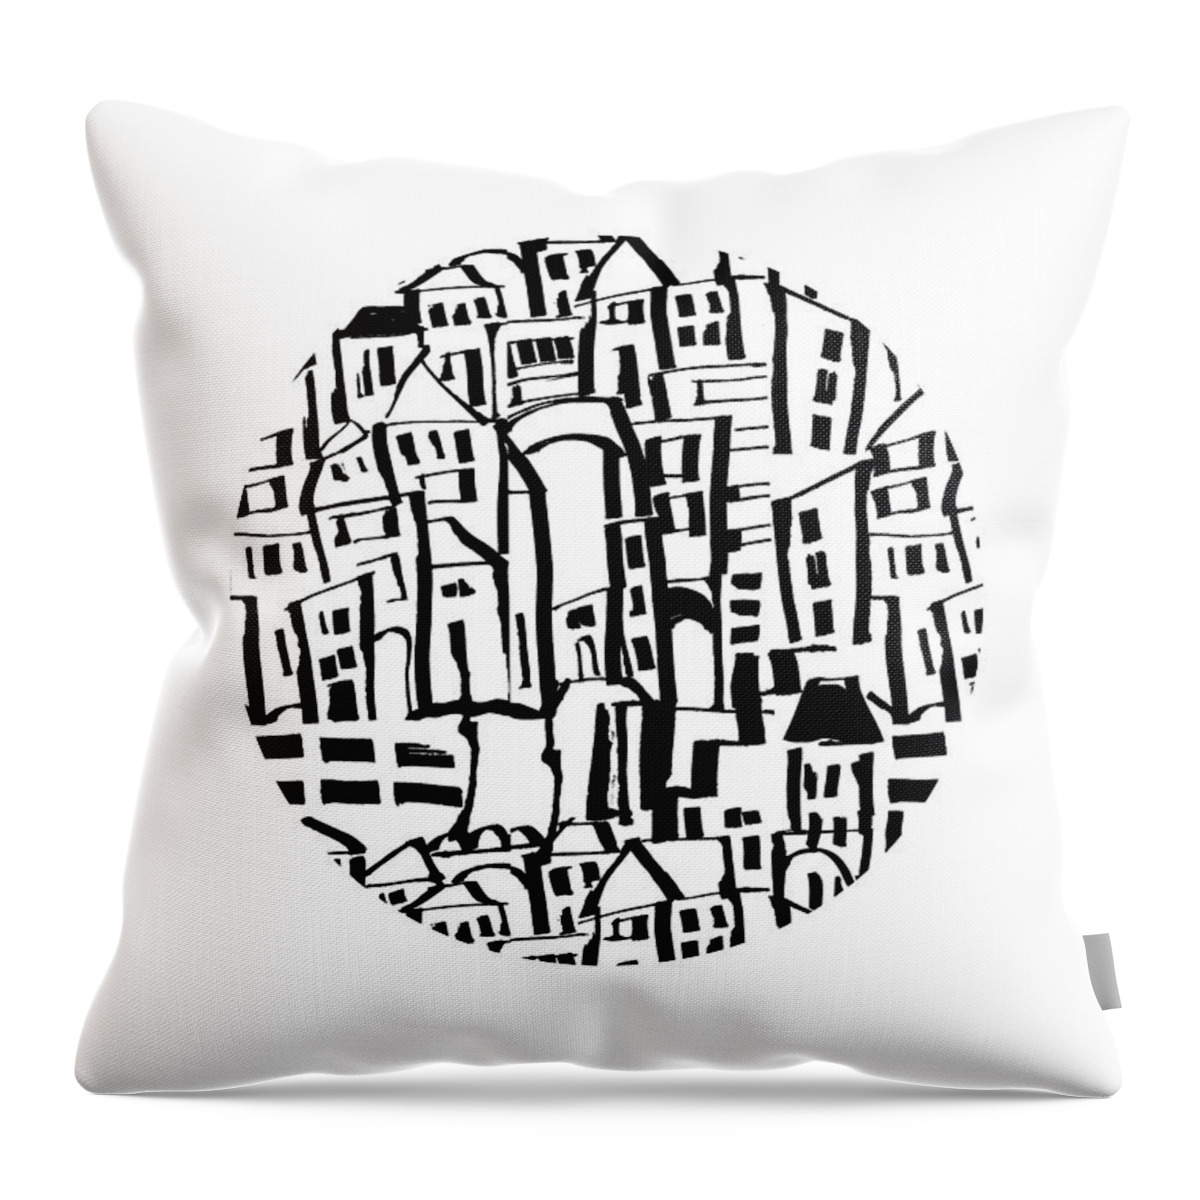 Houses Throw Pillow featuring the drawing Inky Village Sketch Ball- Art by Linda Woods by Linda Woods